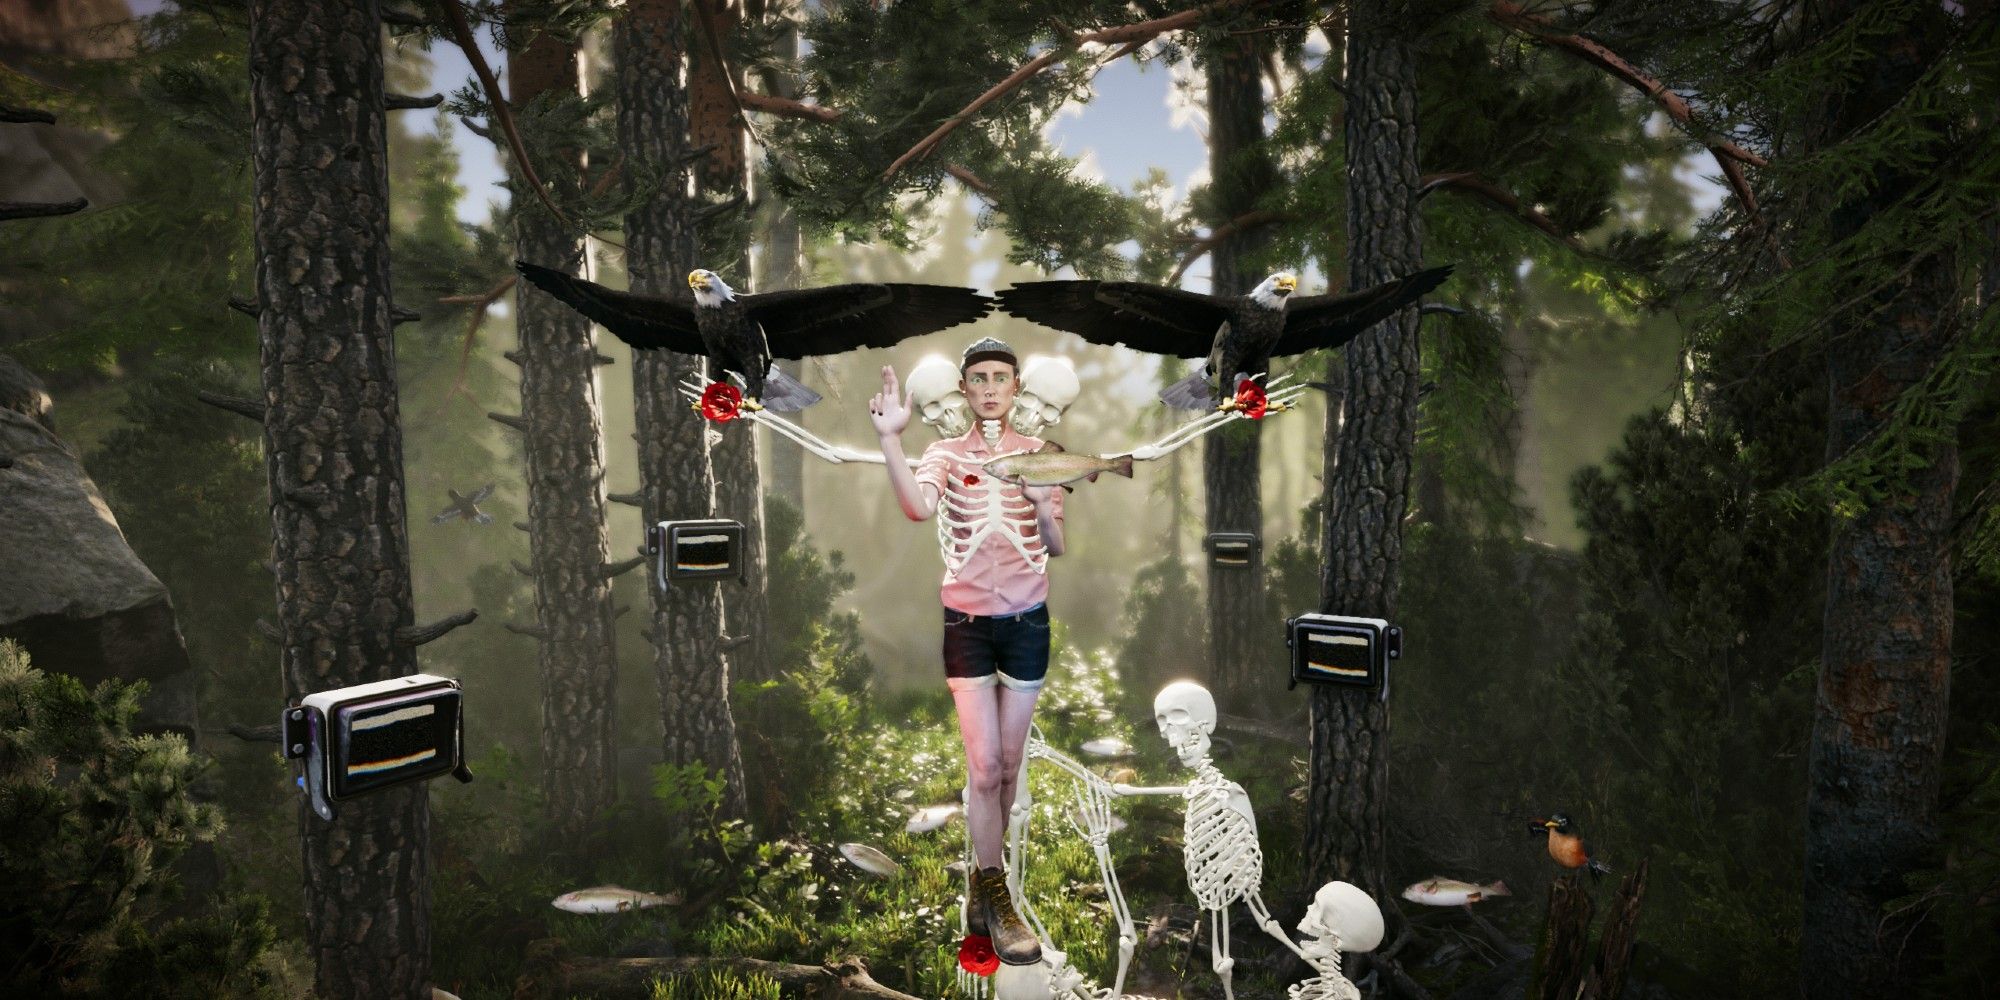 The Forest Cathedral Key Art showing the protagonist in a forest surrounded by skeletons and eagles, with TV screens on the trees